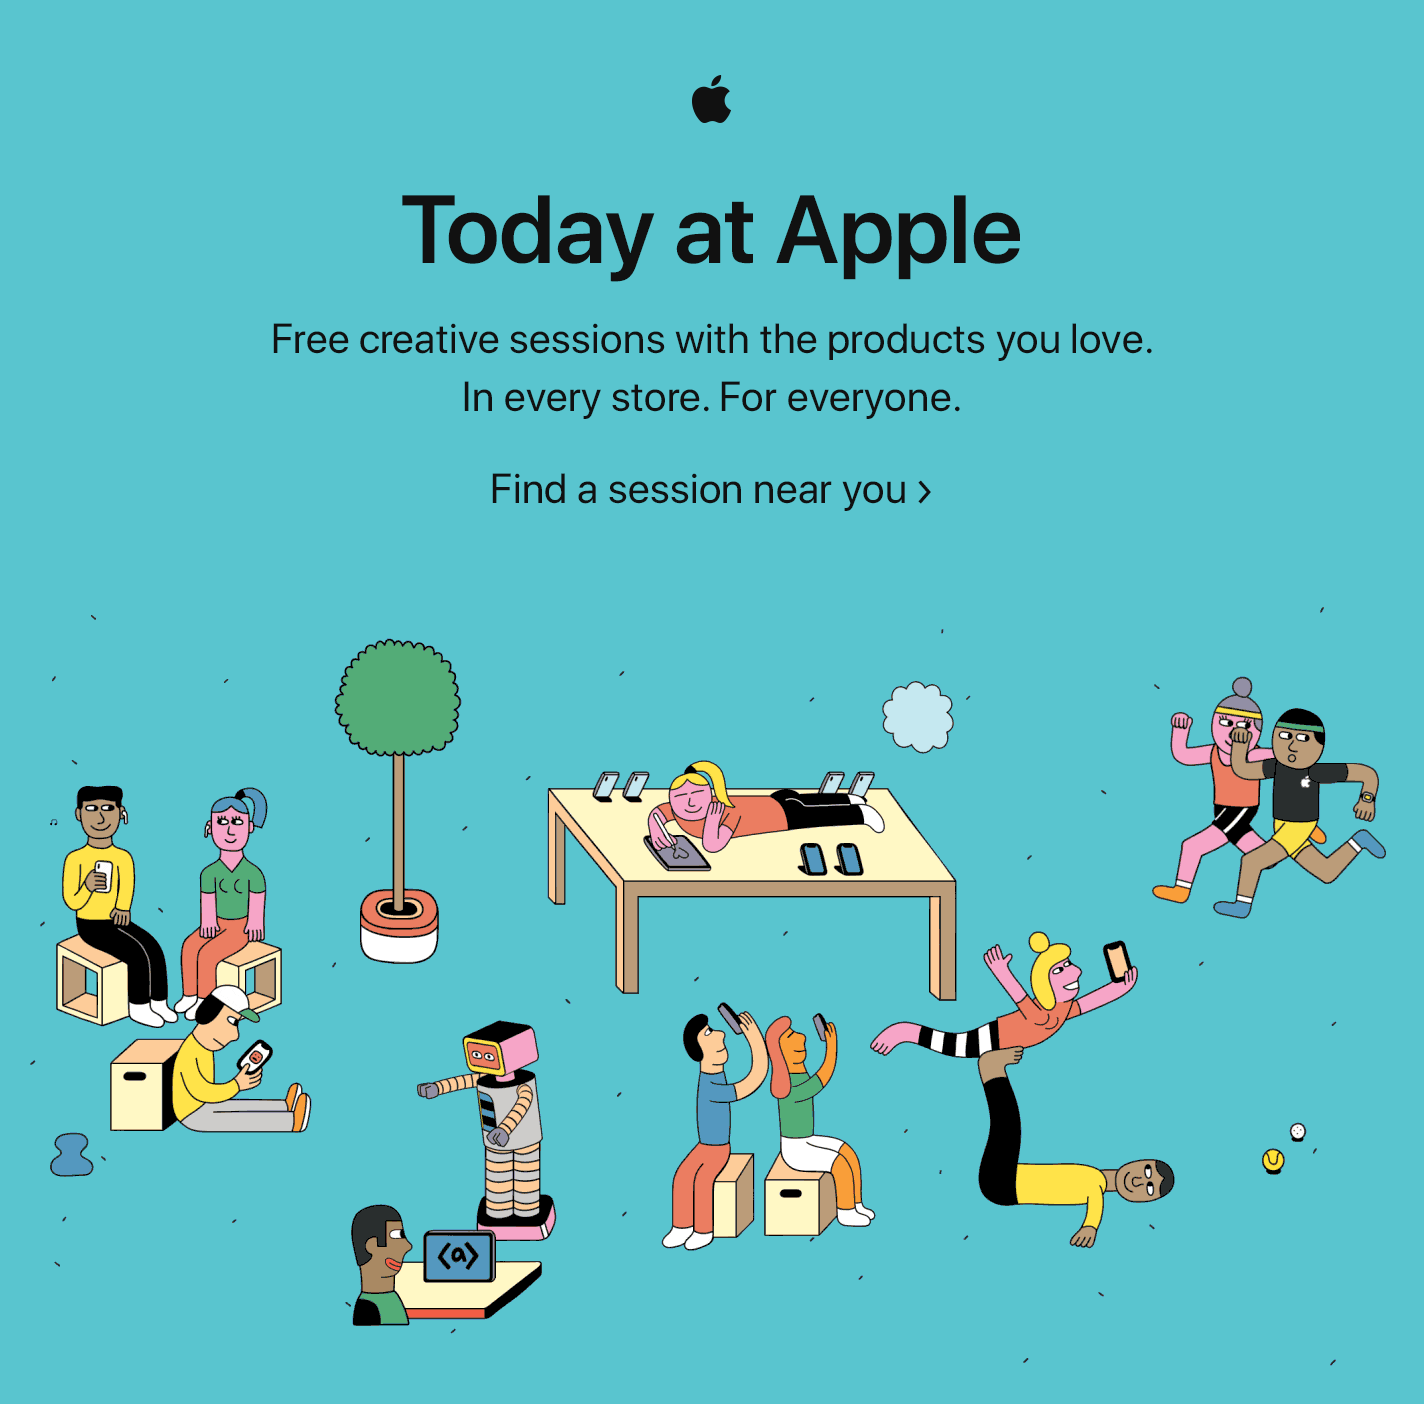 Today at Apple – Free creative sessions with the products you love. In every store. For everyone. Find a session near you